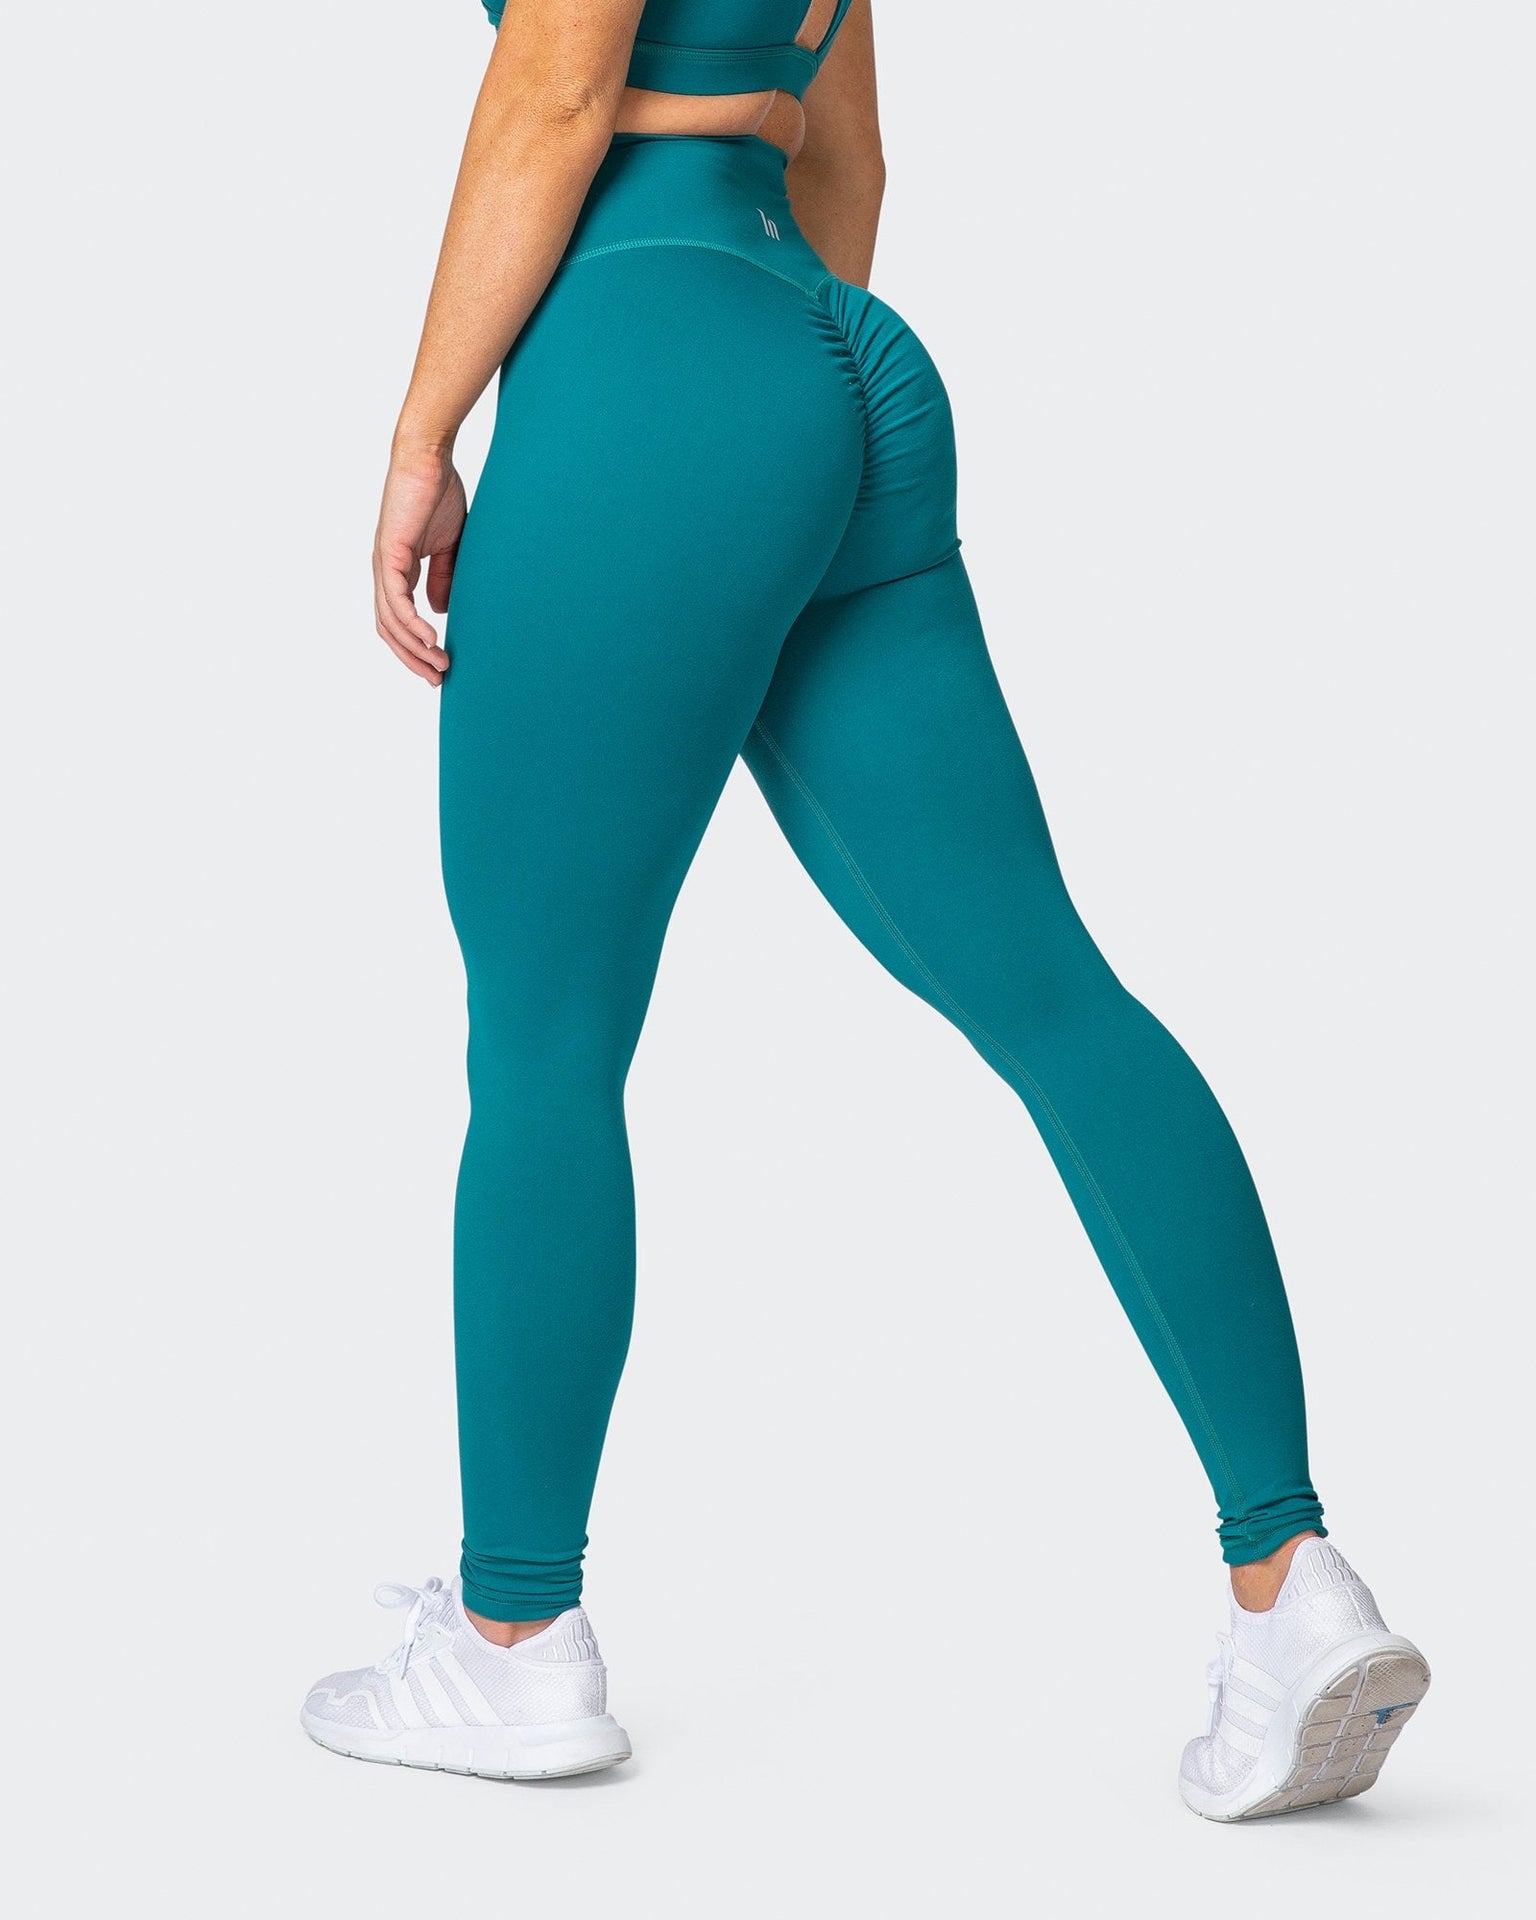 Echt - The Force Scrunch Leggings return in 2022 with an all new